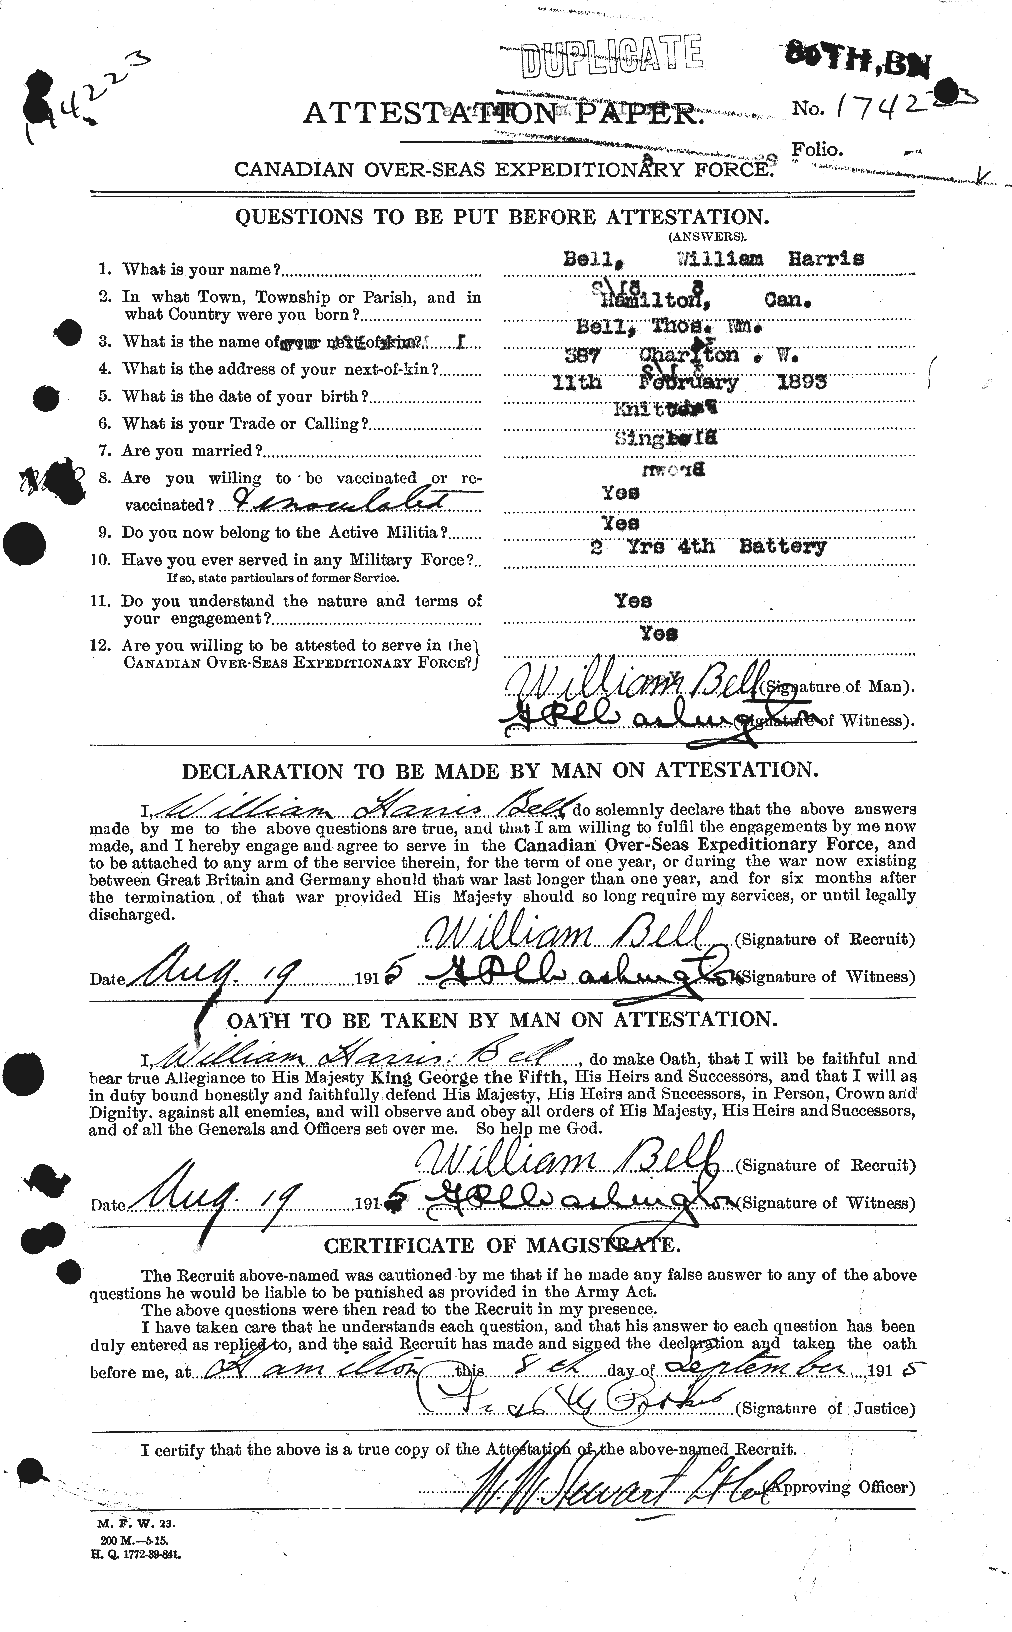 Personnel Records of the First World War - CEF 234887a